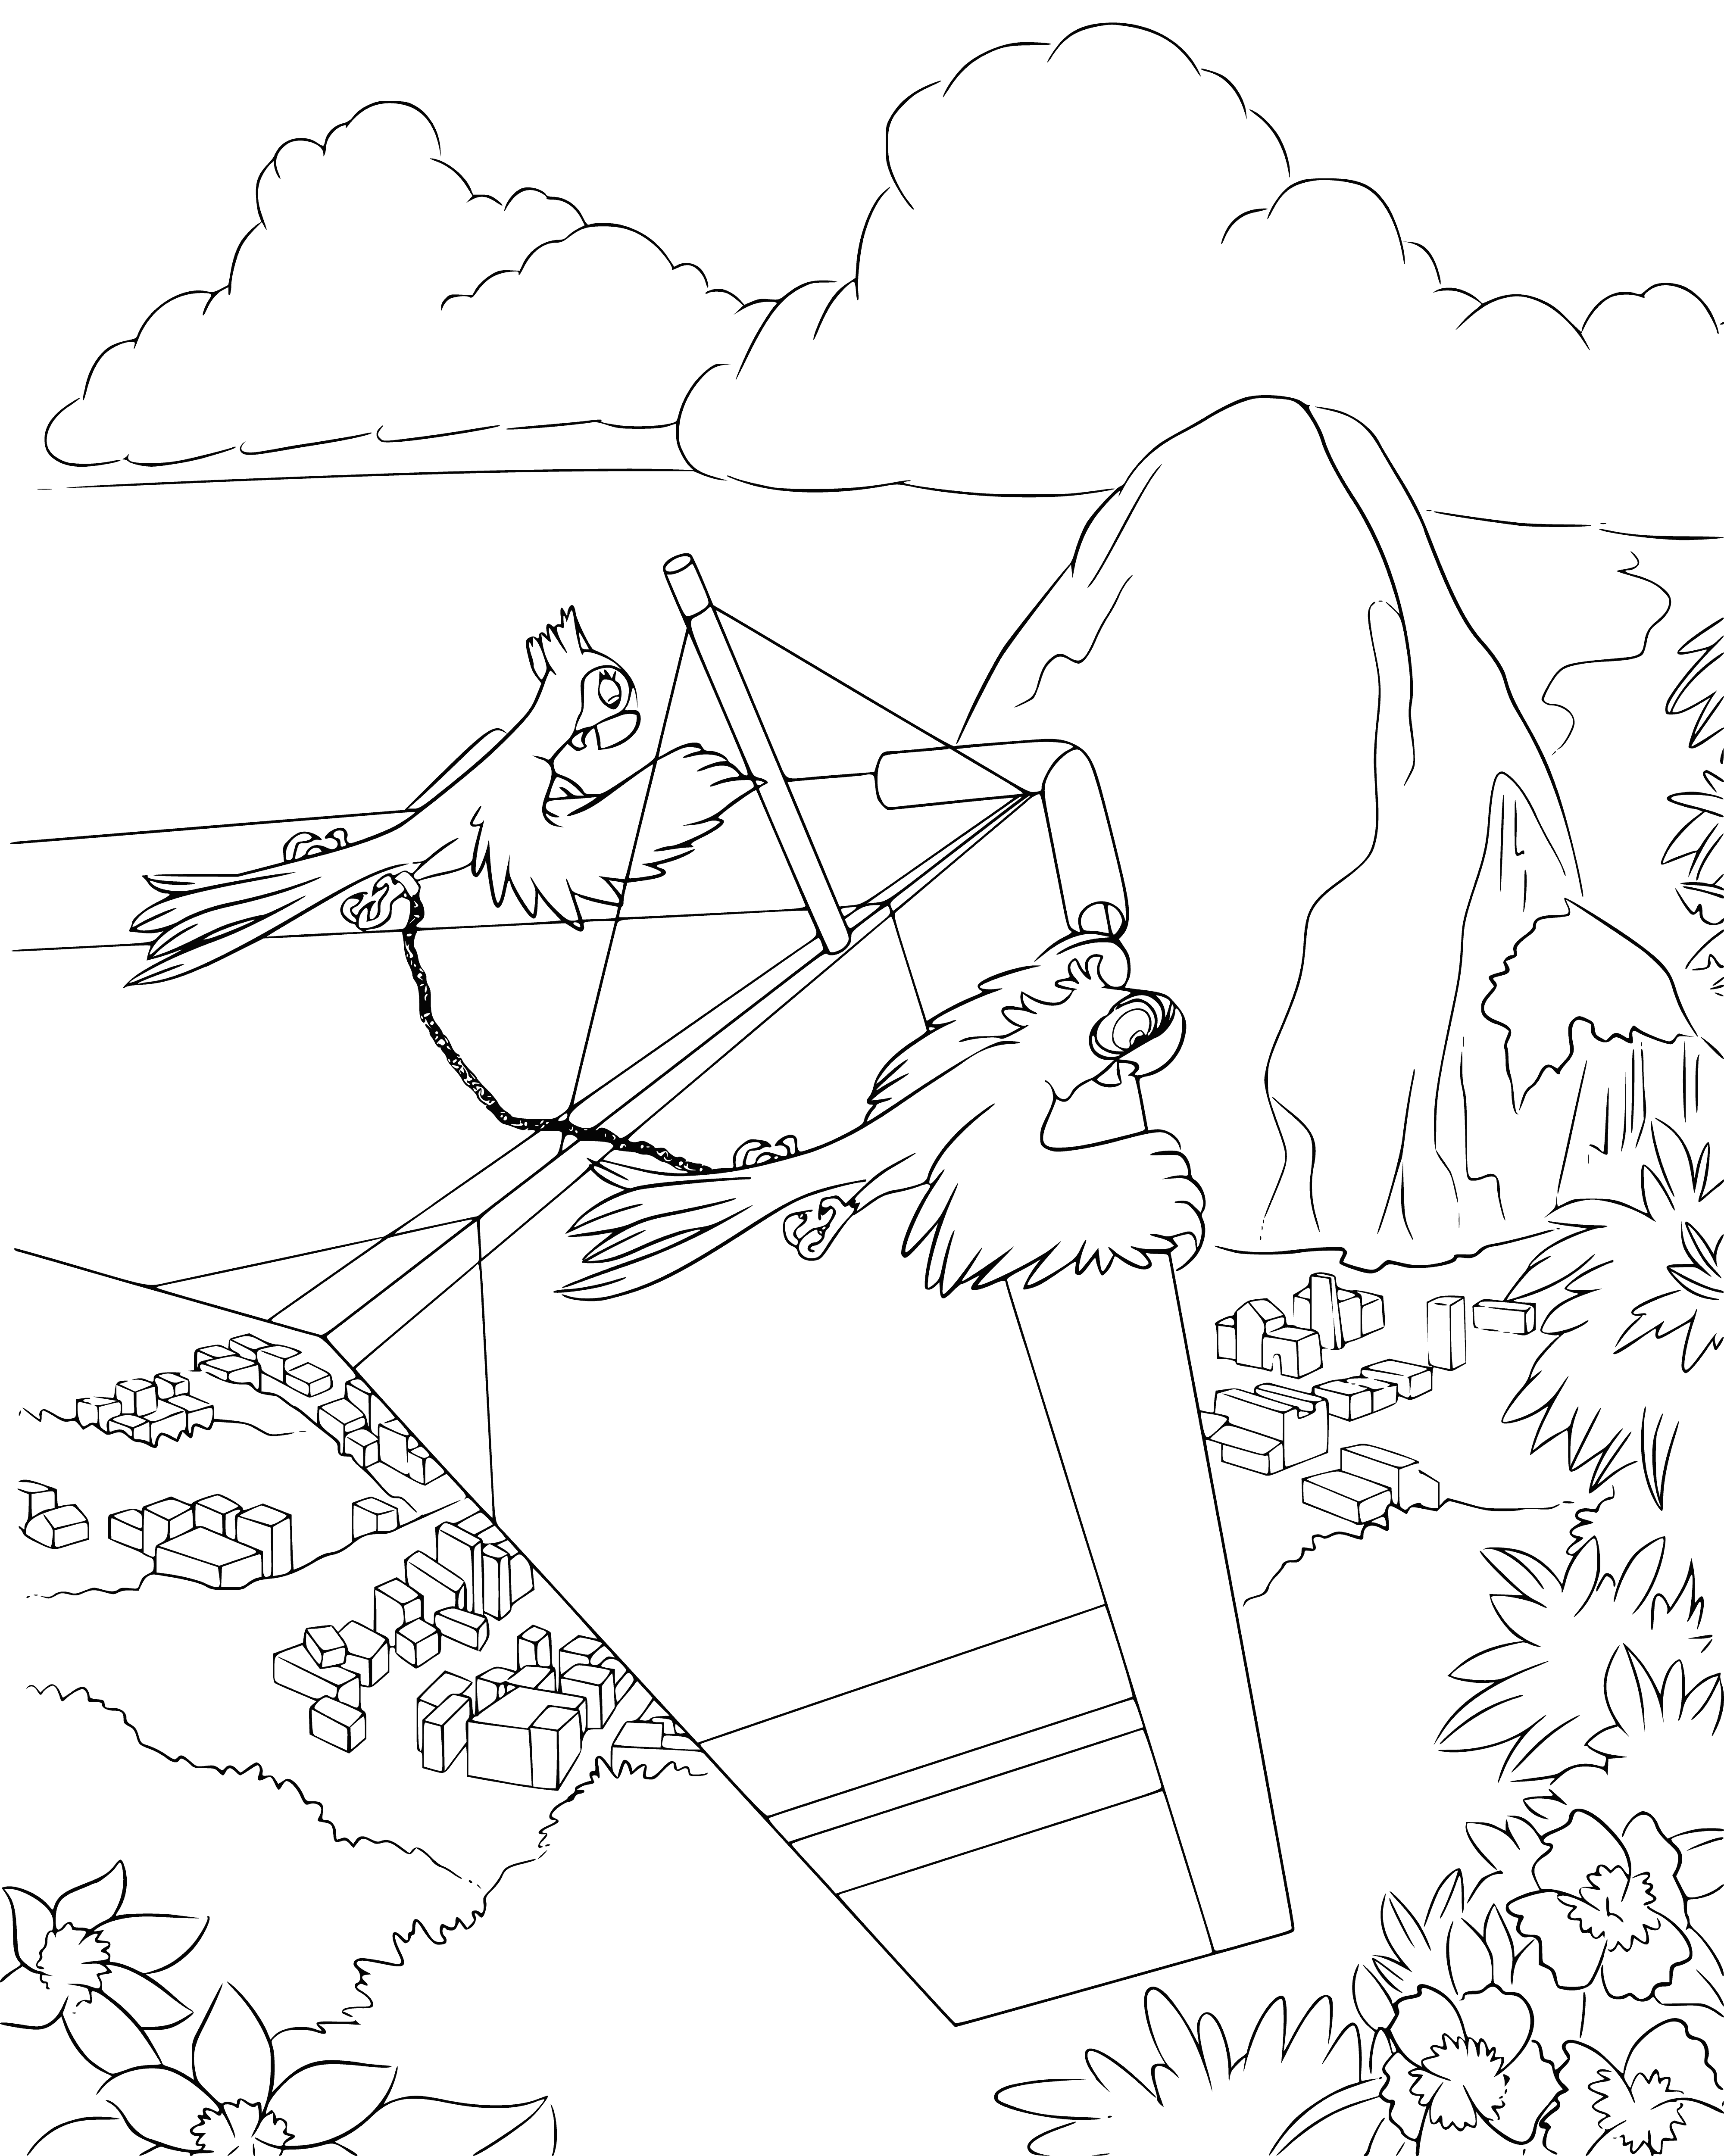 coloring page: A hang glider flying high above Rio de Janeiro, with clear blue sky and green landscapes visible from its open frame.